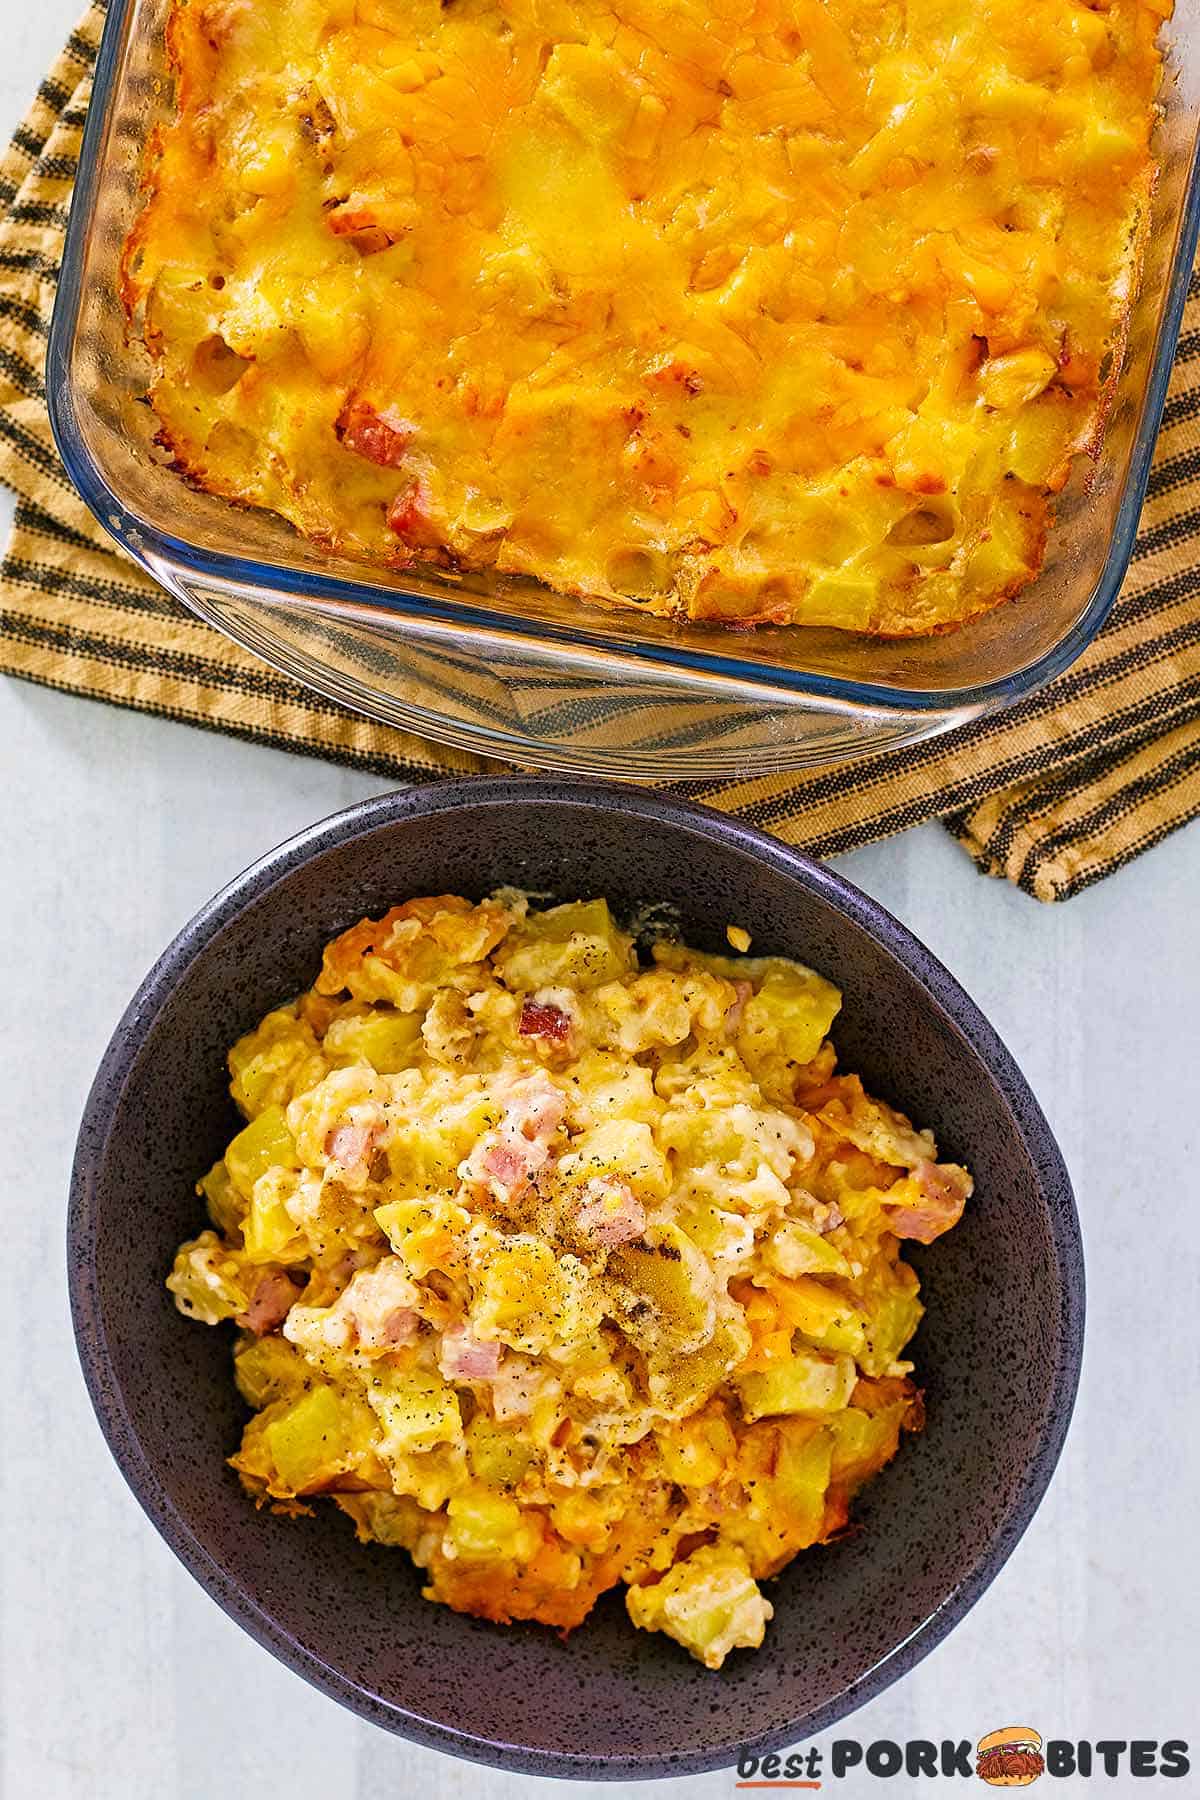 a bowl of complete ham casserole next to a baking dish full of casserole